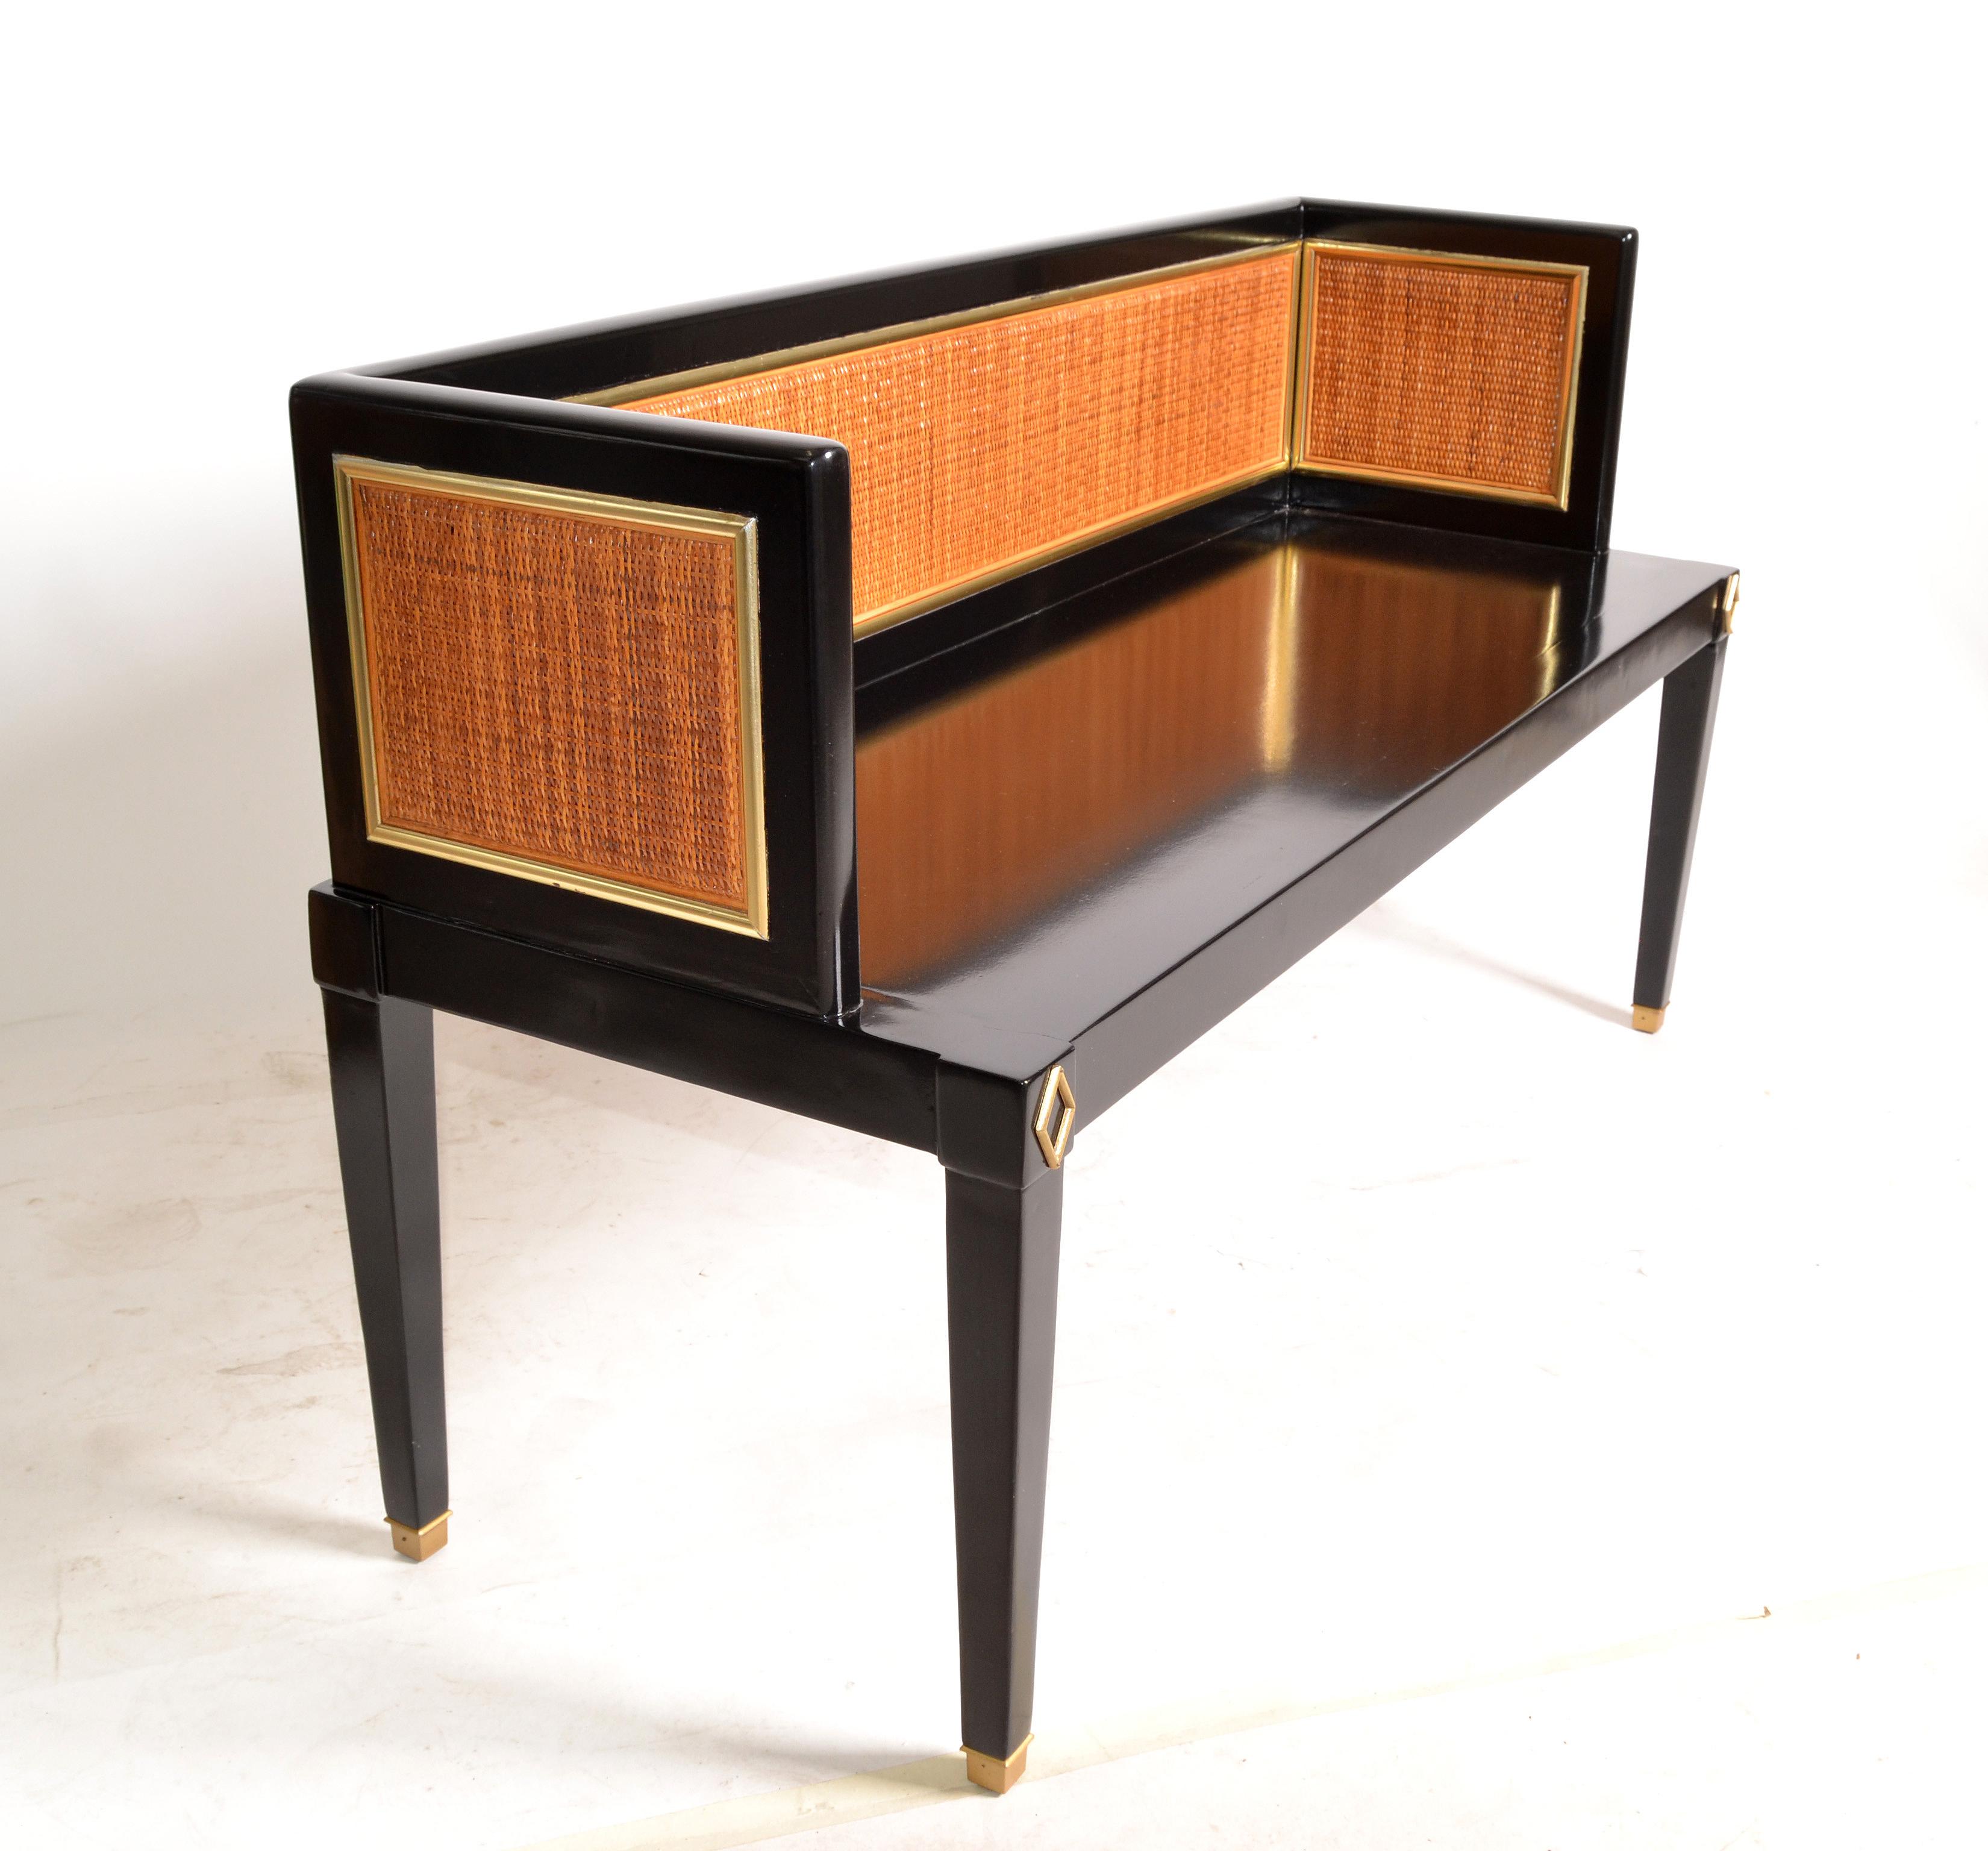 Chinoiserie inspired Mid-Century Modern rectangular seating bench in Black Lacquer.
The Bench features a wooden frame with woven cane backrest.
The legs have brass covers.
Completely restored and ready for Your Home.
Lovely 1970s Asian influenced